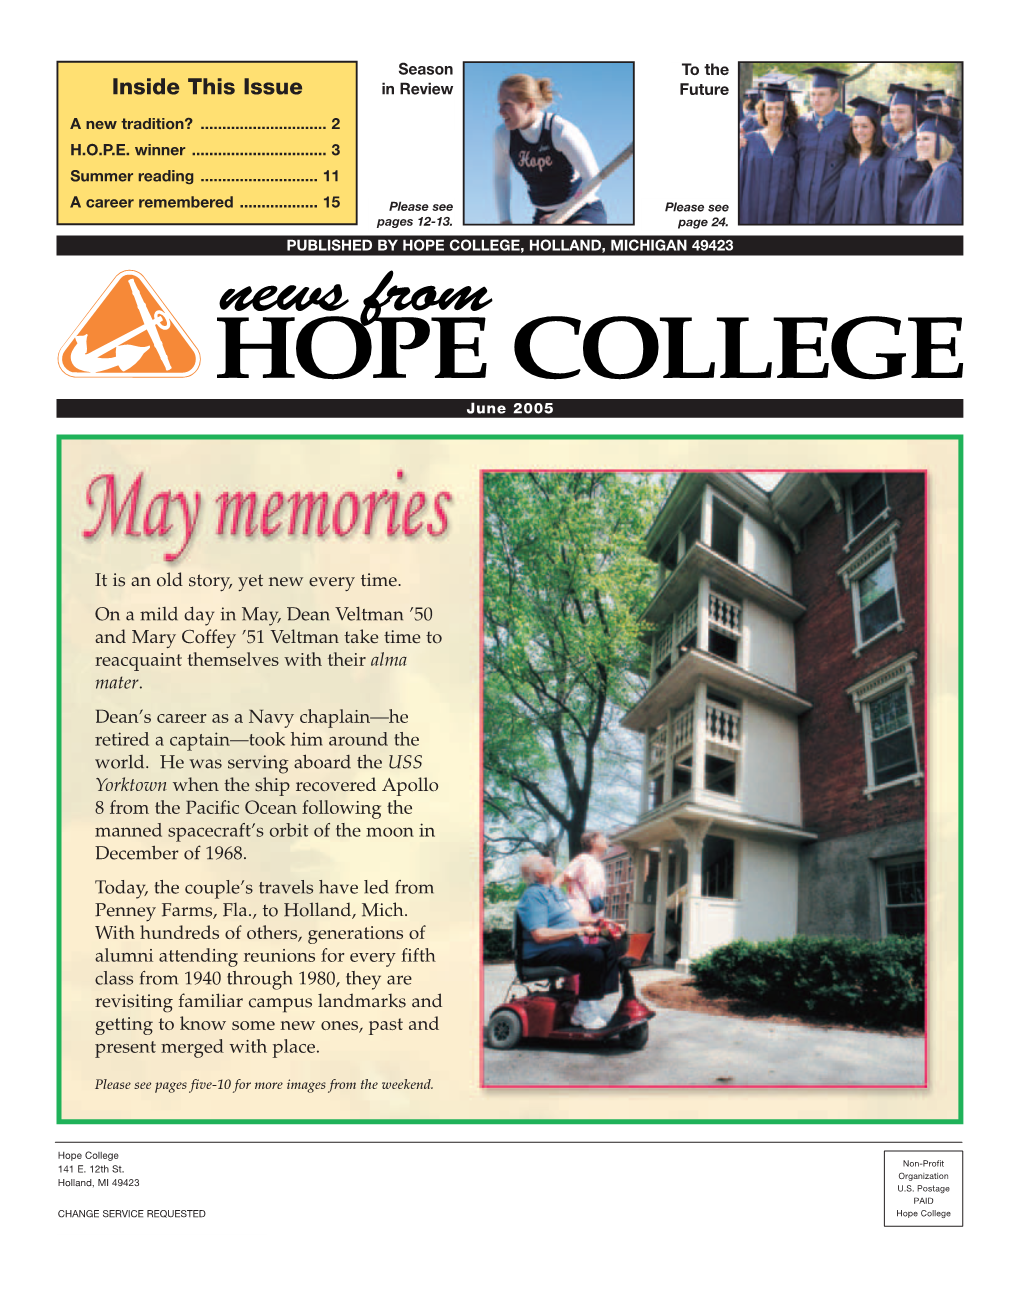 News from HOPE COLLEGE June 2005